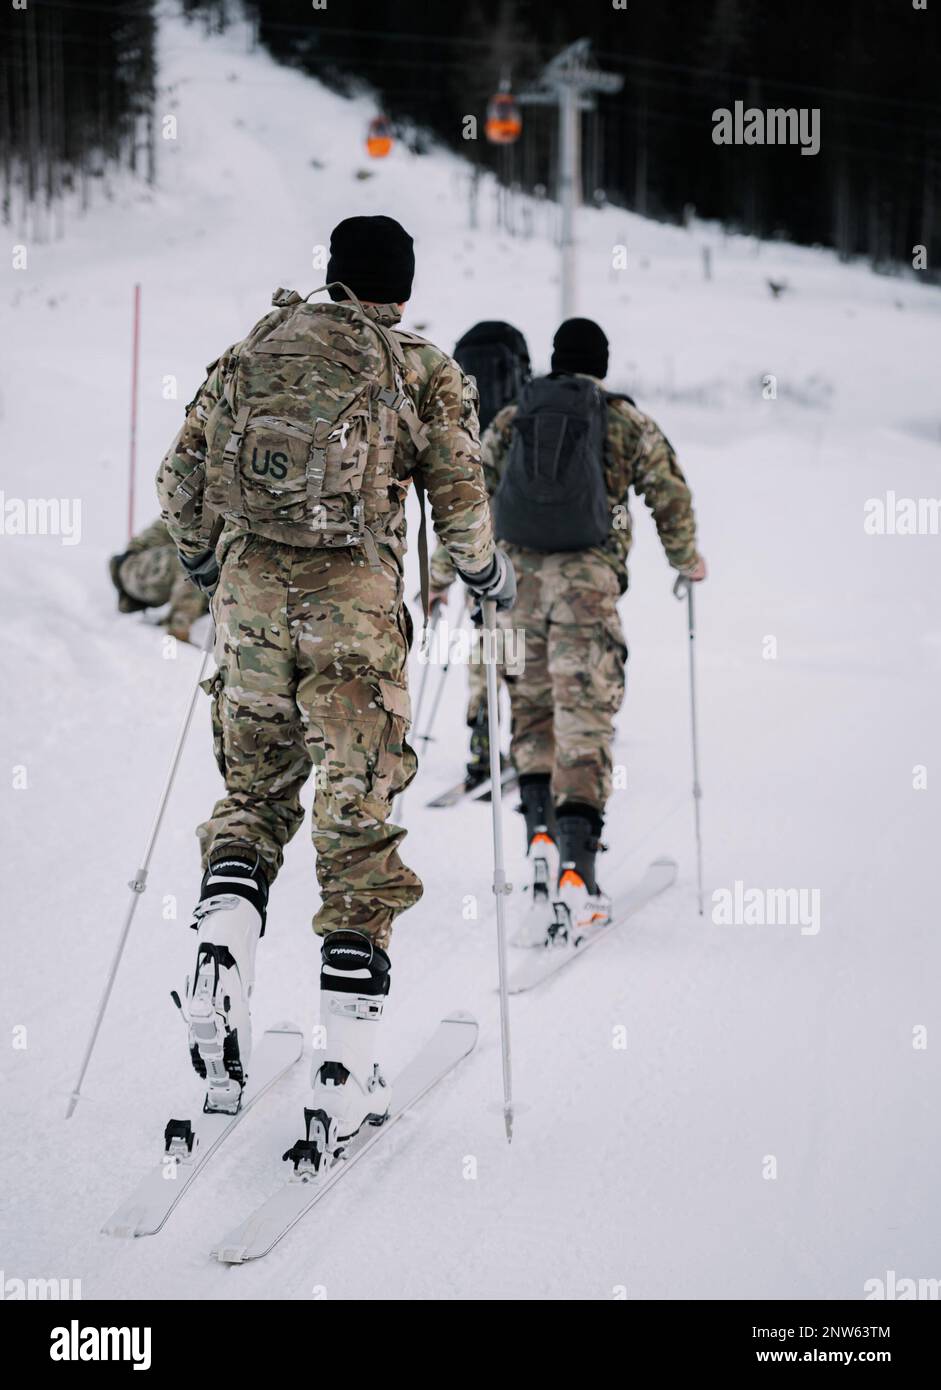 U.S. Army Paratroopers assigned to the 173rd Airborne Brigade conduct alpine ski training alongside a ski instructor from the Italian Army’s Alpini Brigade in Corvara, Italy, Feb. 1, 2023.    Exercise Alpine Star - Winter Resolve is an Italian Army-hosted multinational mountain and arctic warfare training exercise. Three reconnaissance platoons from the 173rd Airborne Brigade take part in a three-phase training regimen led by the Alpini Brigade to expand force capabilities by learning how to move, shoot and operate in mountainous and arctic conditions. Over the course of the training, these pa Stock Photo